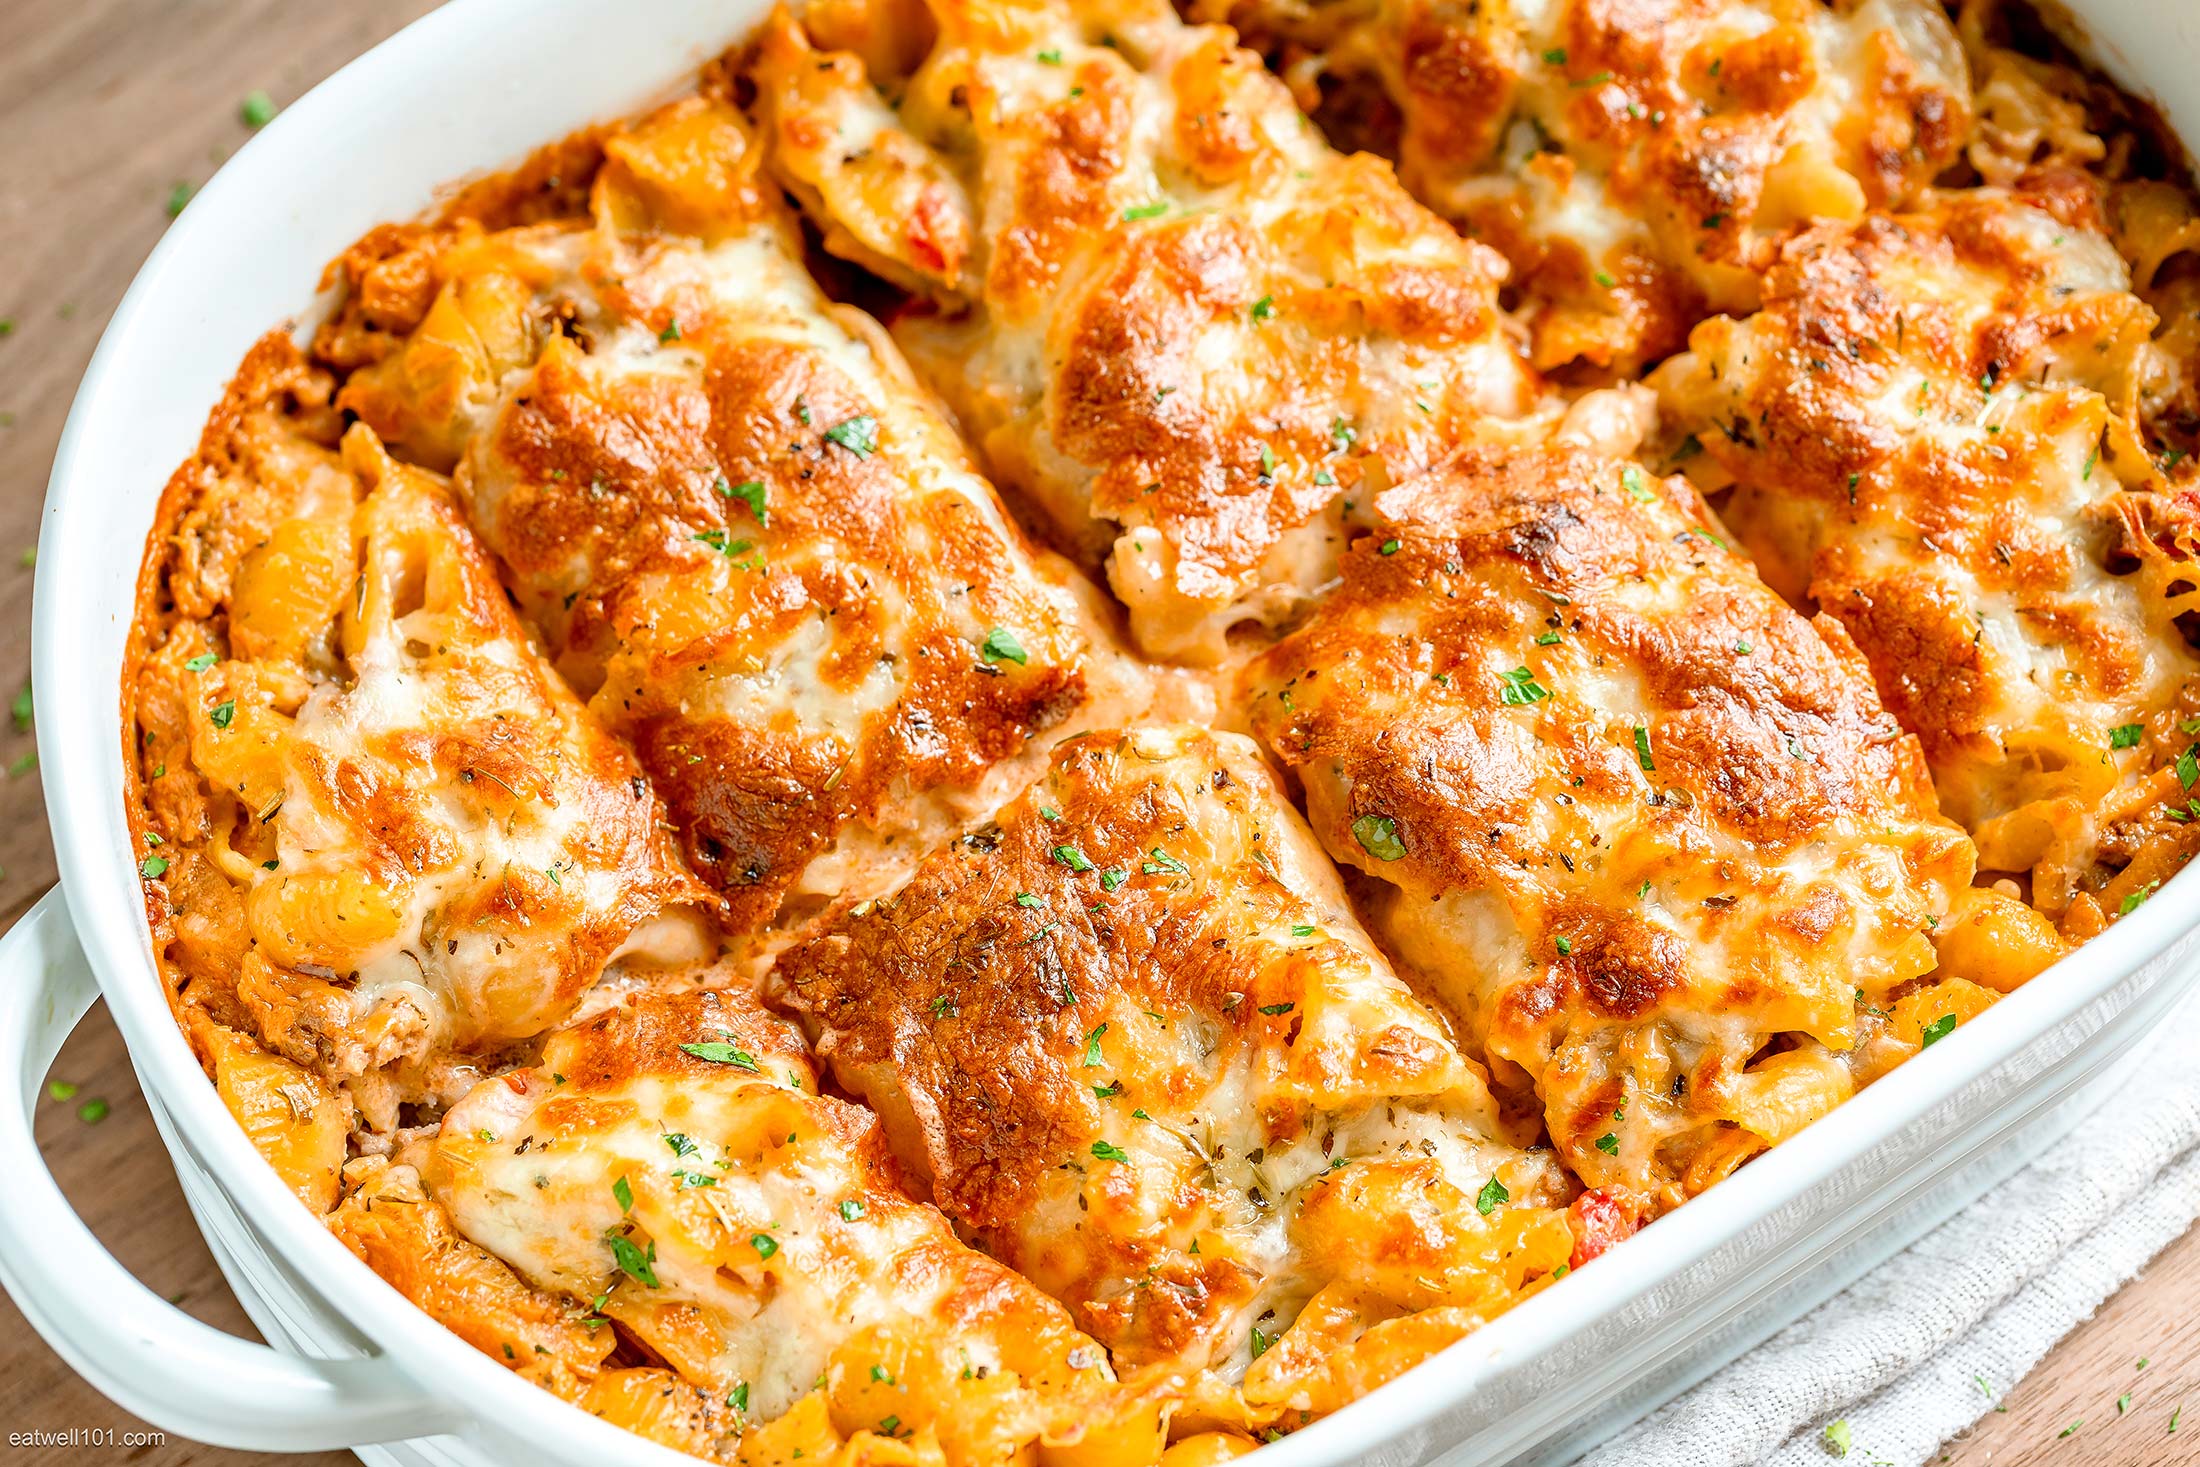 Cheesy Baked Pasta with Creamy Meat Sauce